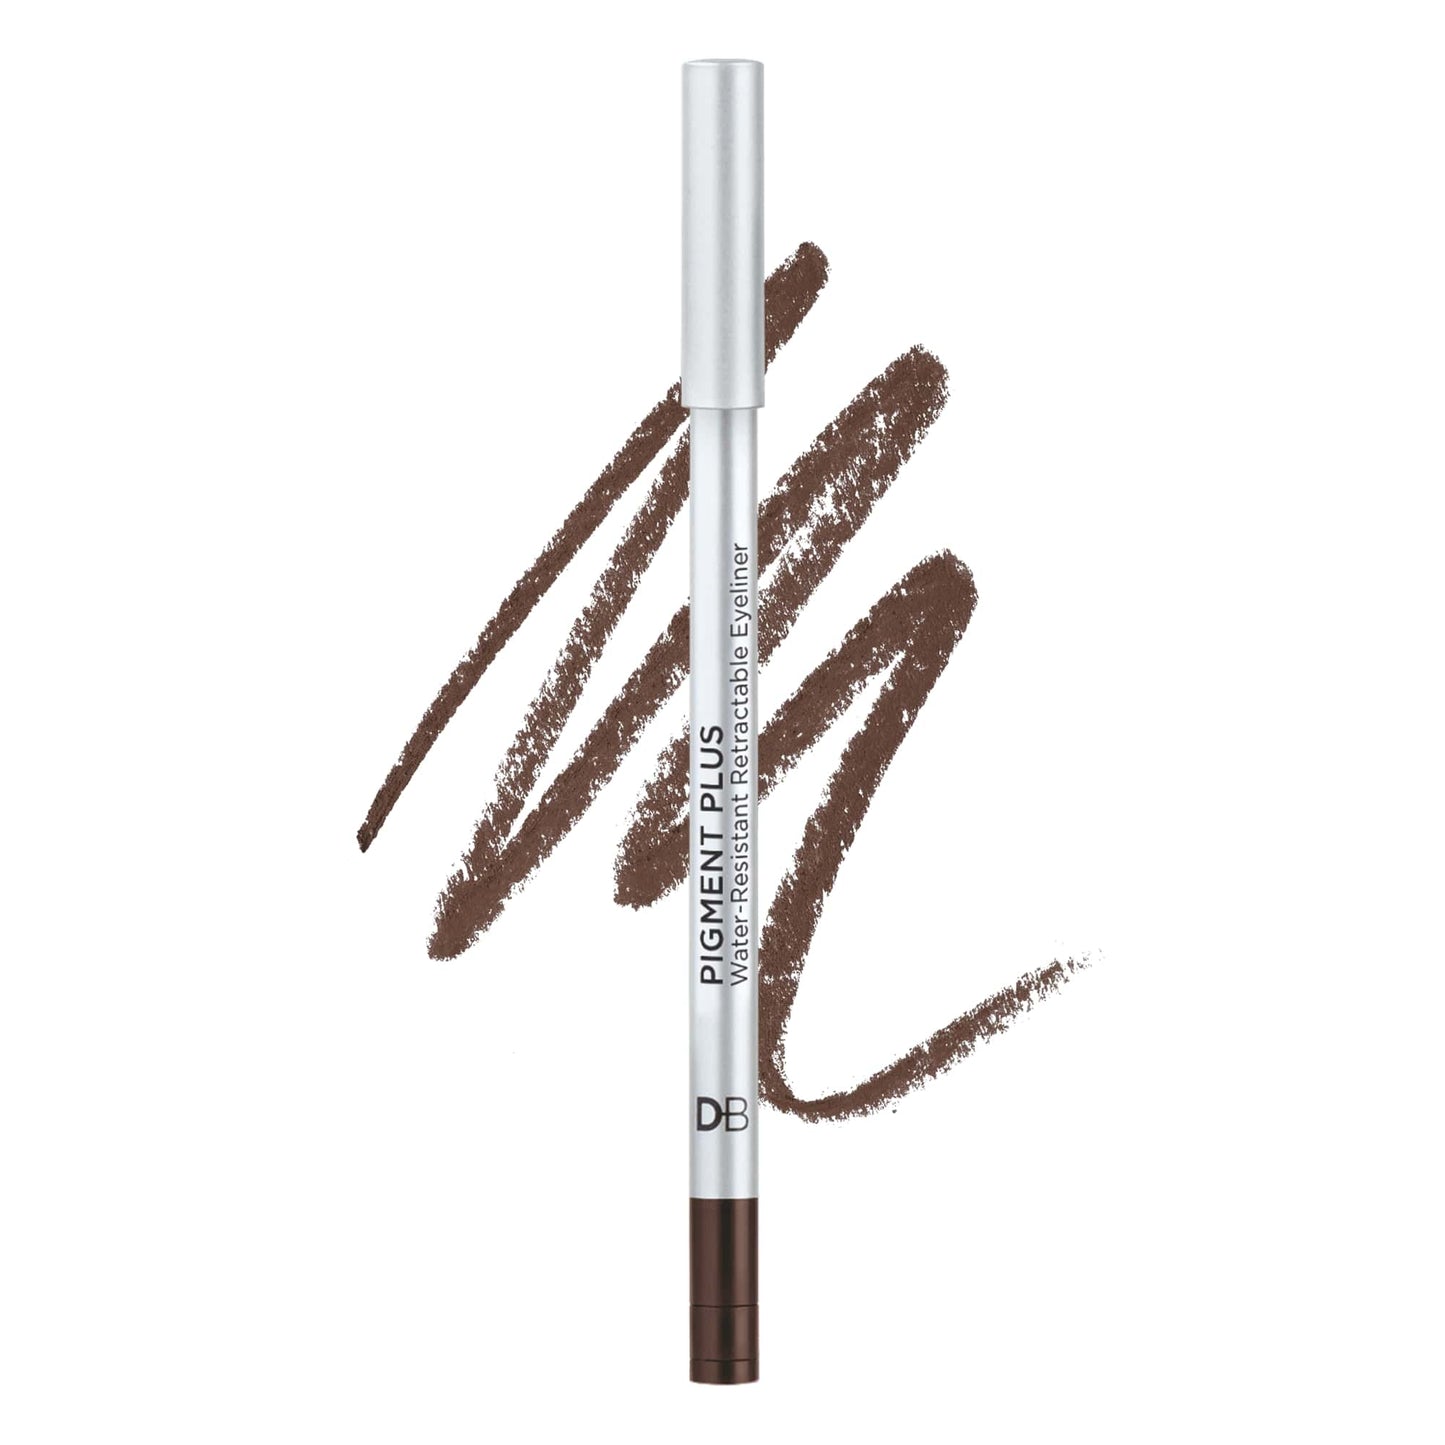 Pigment Plus Water Resistant Eyeliner (Chocolate Shard) with swatch | DB Cosmetics